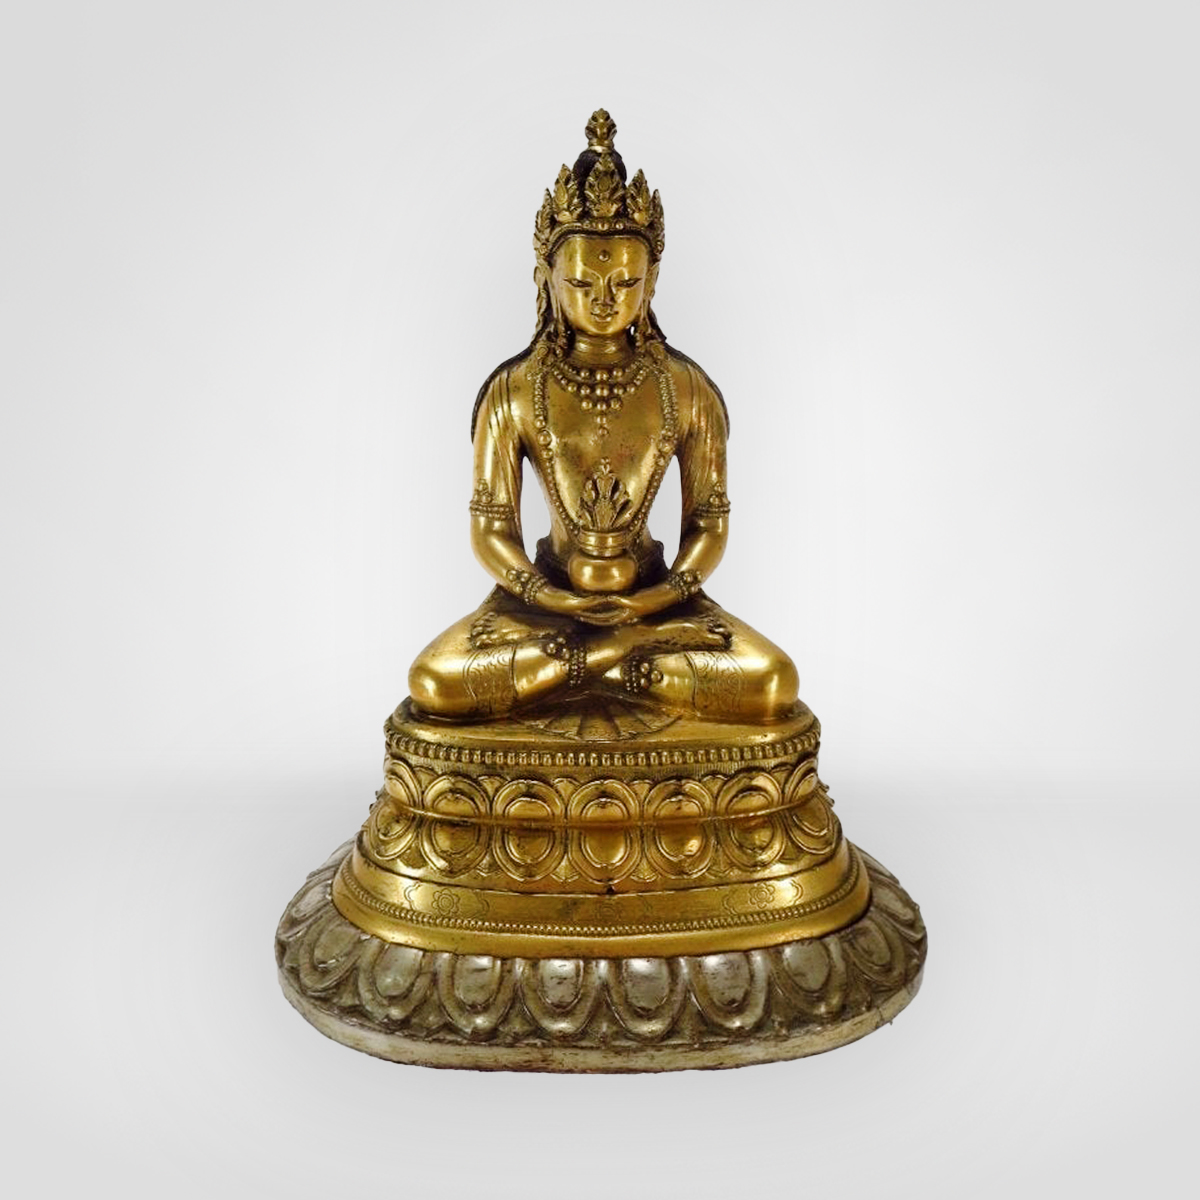 Highlight picture for item 'Capsule & Litchfield’s Asian art auctions'